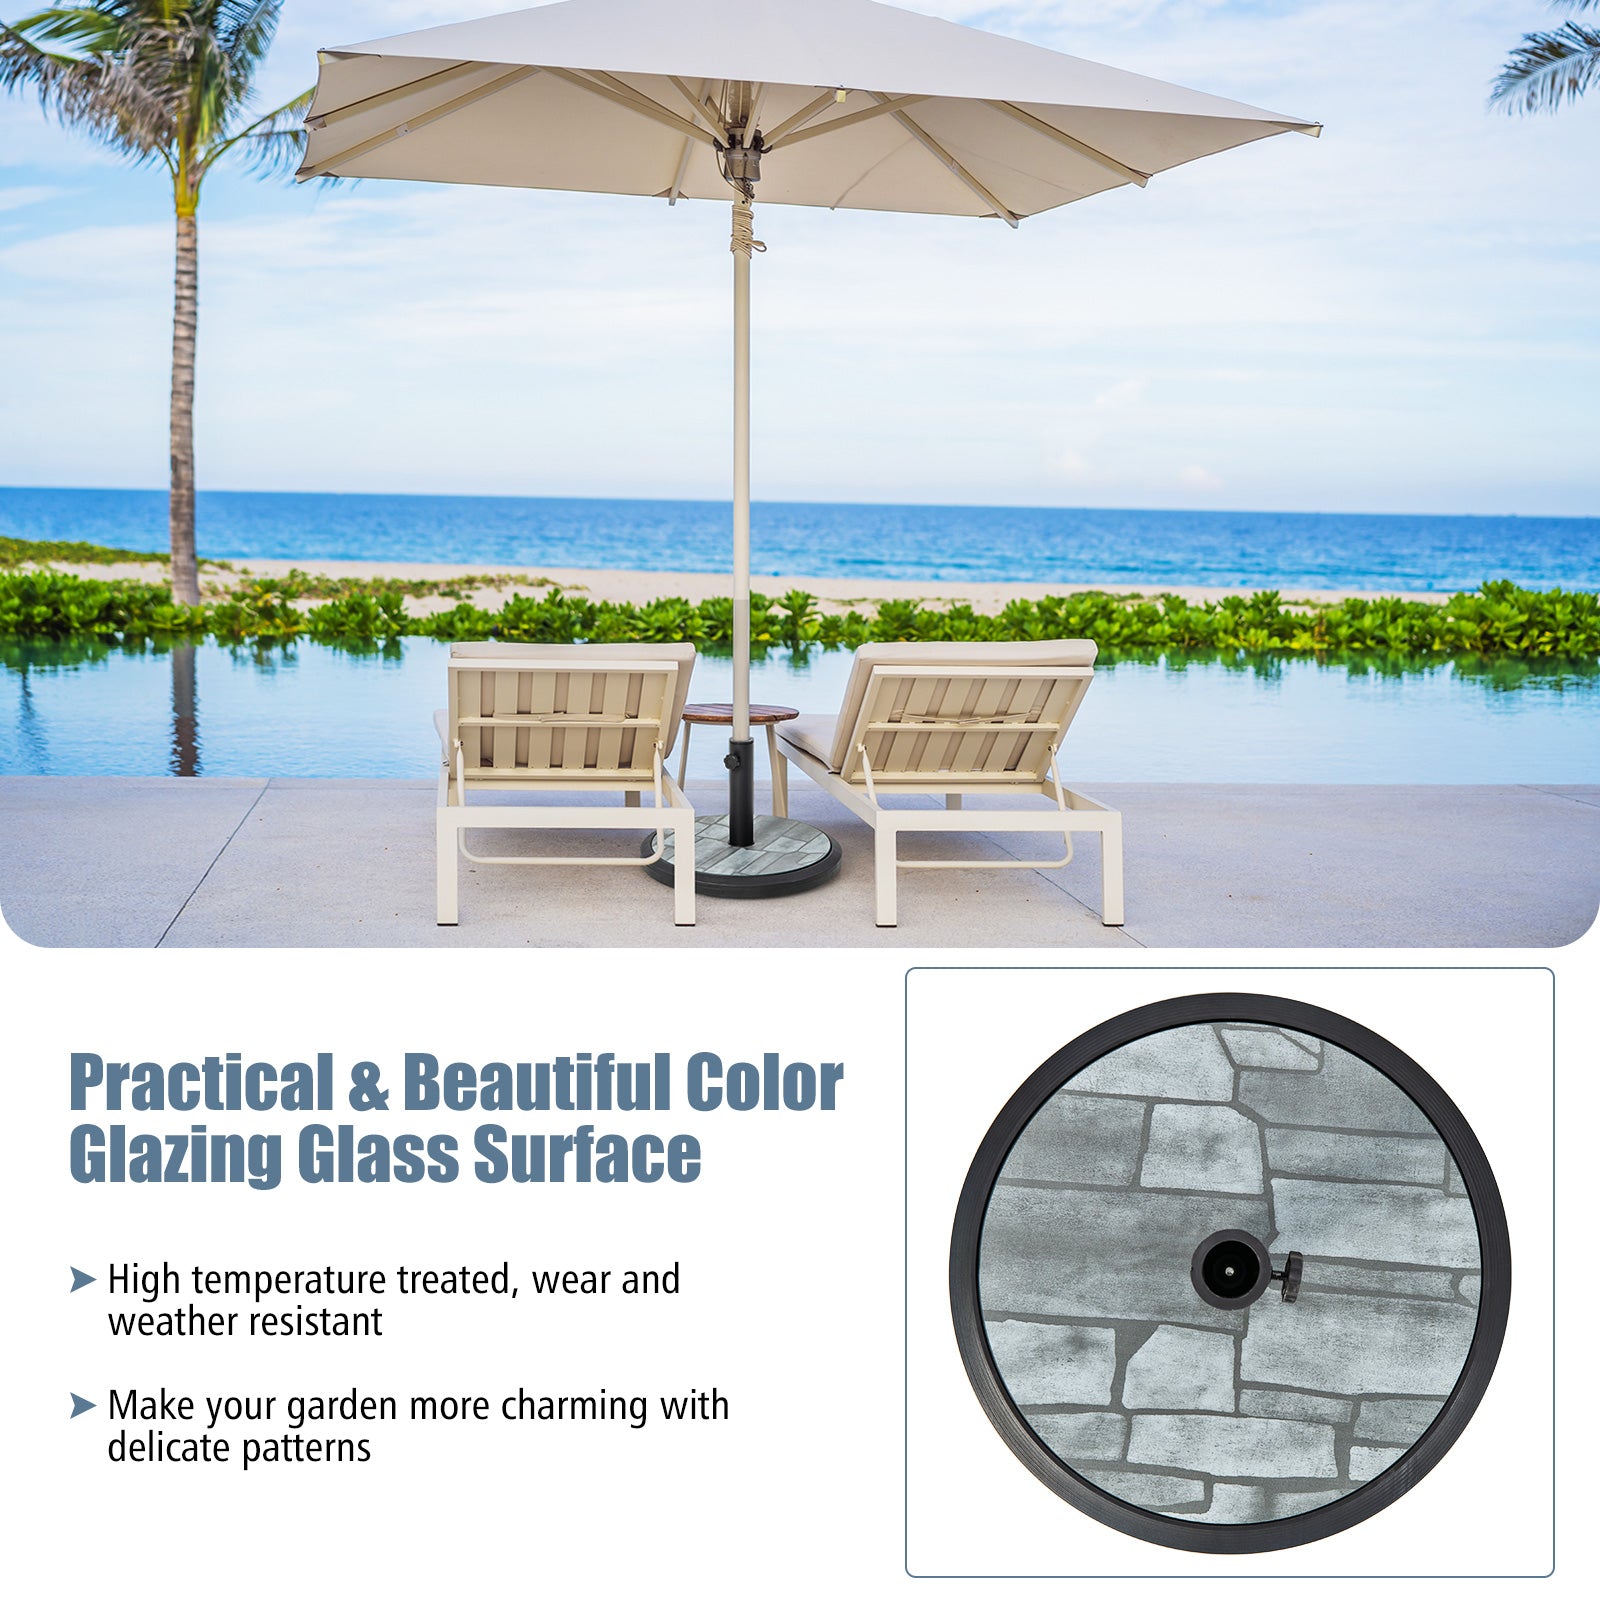 Stylish Stone Pattern: The outdoor market umbrella stand features an attractive color glazing glass surface with delicate patterns, adding charm to your garden. The high-temperature treatment enhances its wear and weather resistance.